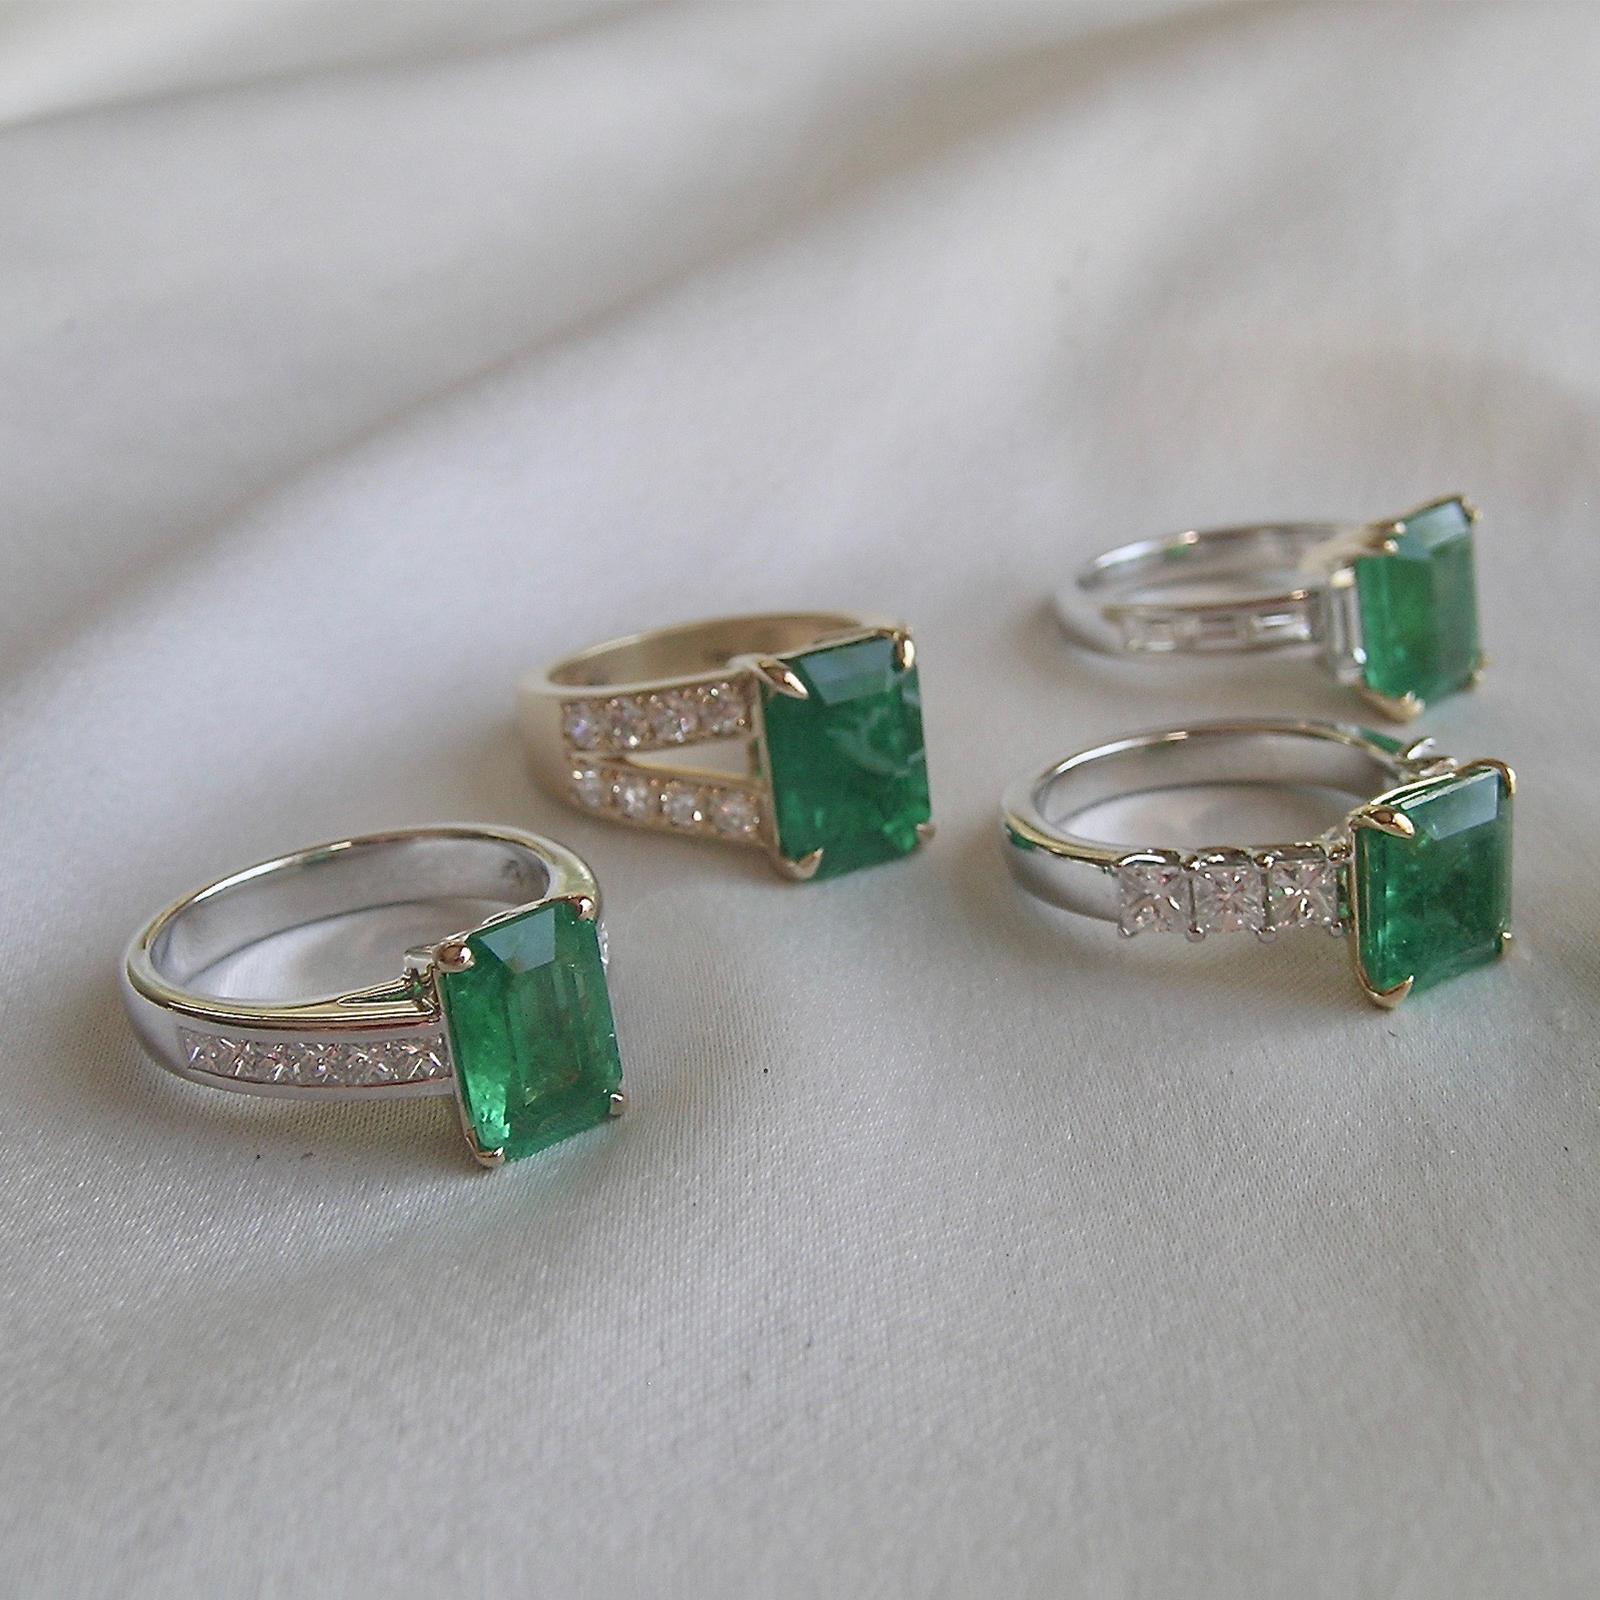 Emerald Cut 1.93ct Zambian Emerald Cocktail Ring For Sale